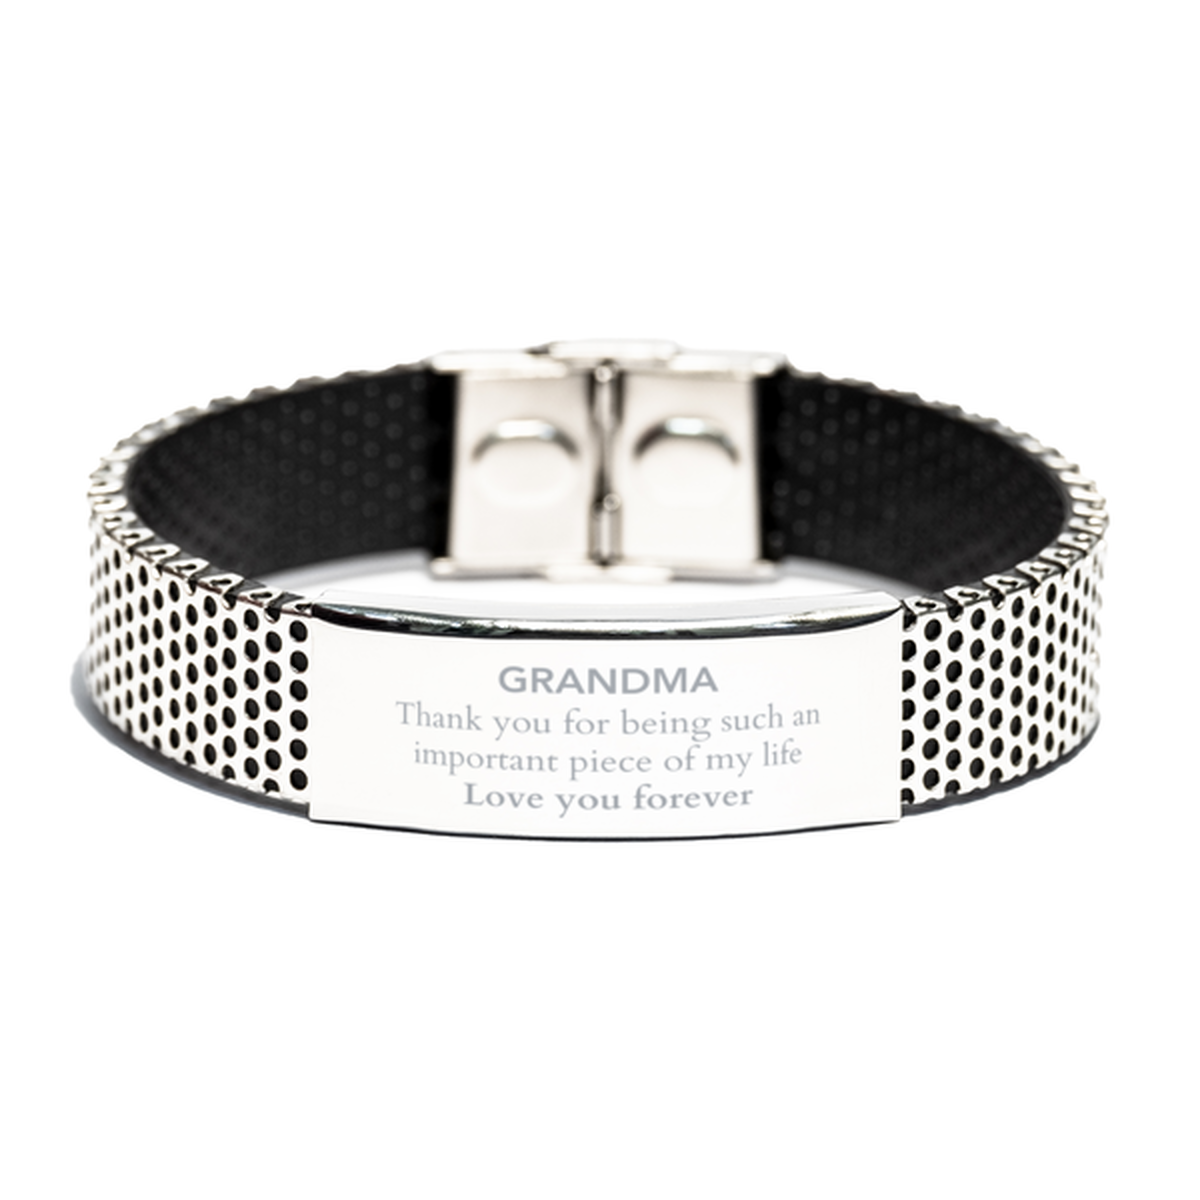 Appropriate Grandma Stainless Steel Bracelet Epic Birthday Gifts for Grandma Thank you for being such an important piece of my life Grandma Christmas Mothers Fathers Day